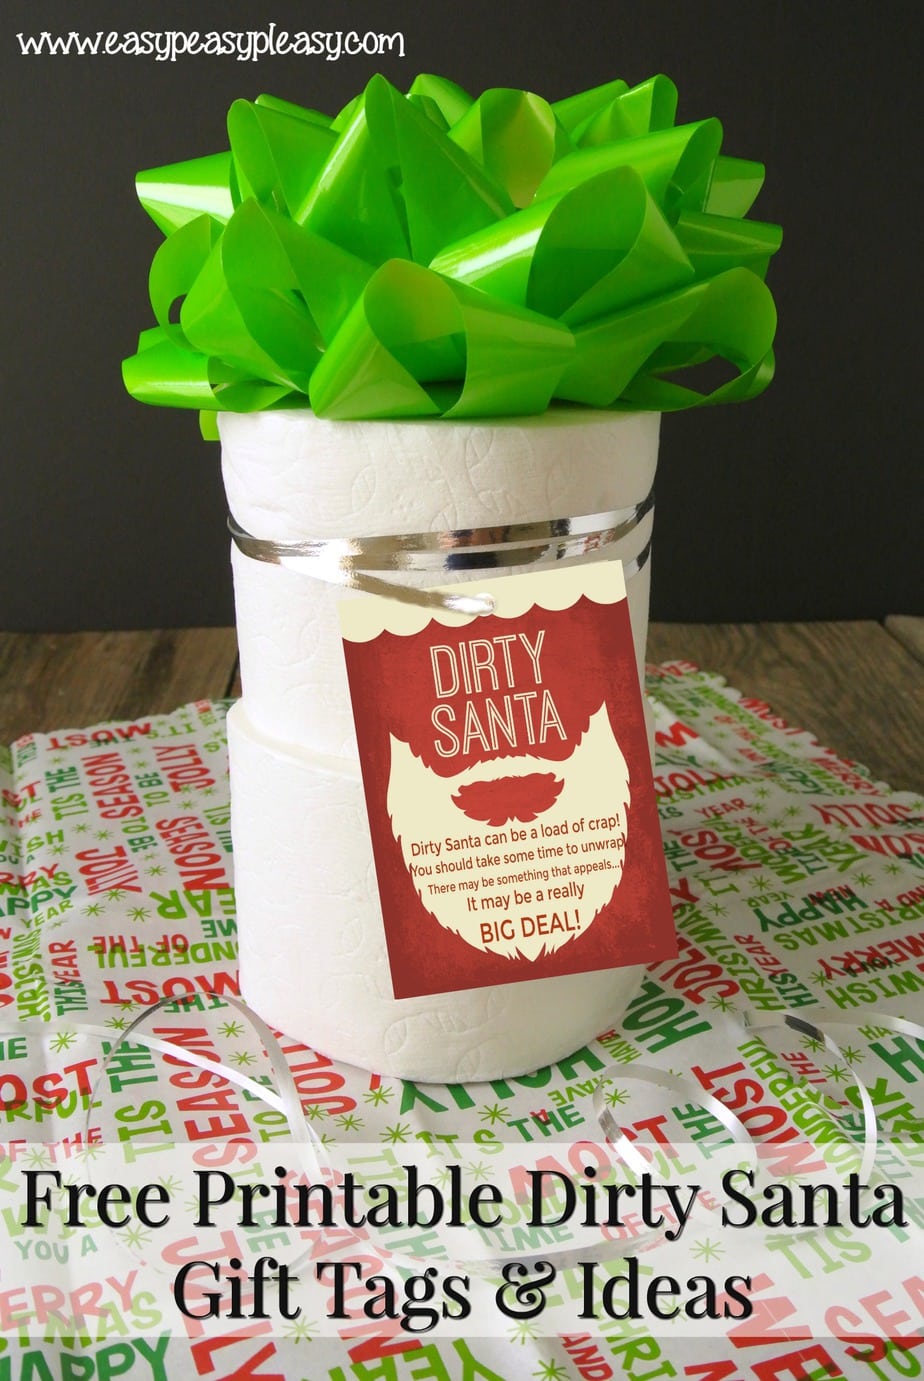 Check out what's hiding in this roll of toilet paper. It's the perfect Dirty Santa Gift Idea. Free Printable Gift Tag included.